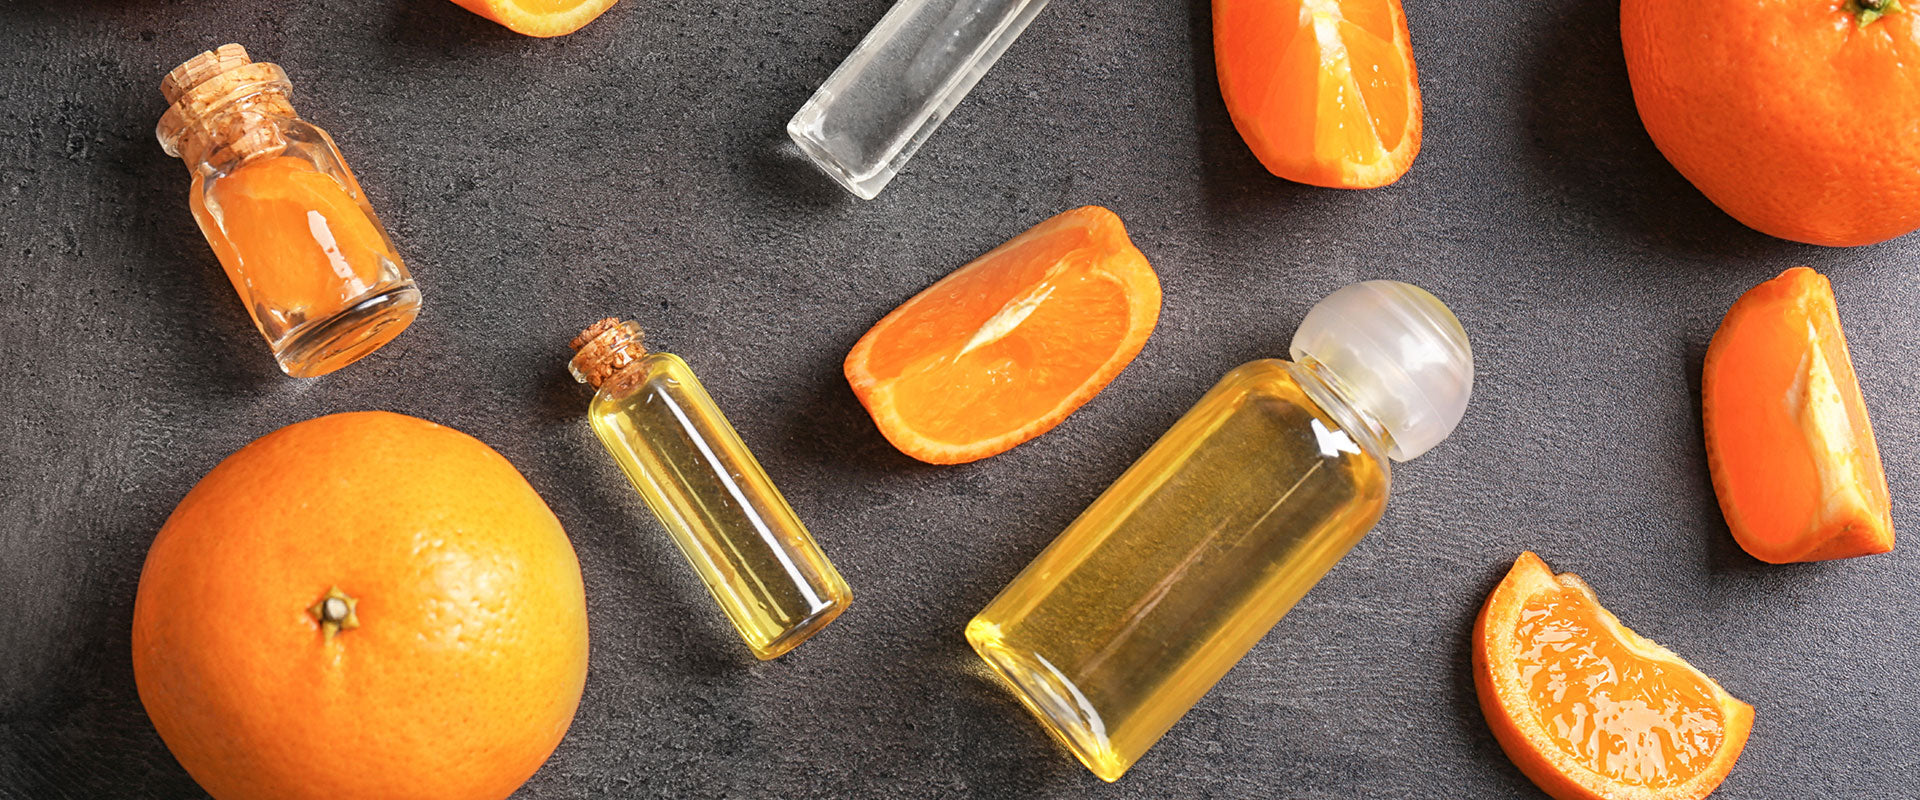 citrus extract made with food grade alcohol in glass bottles with orange slices